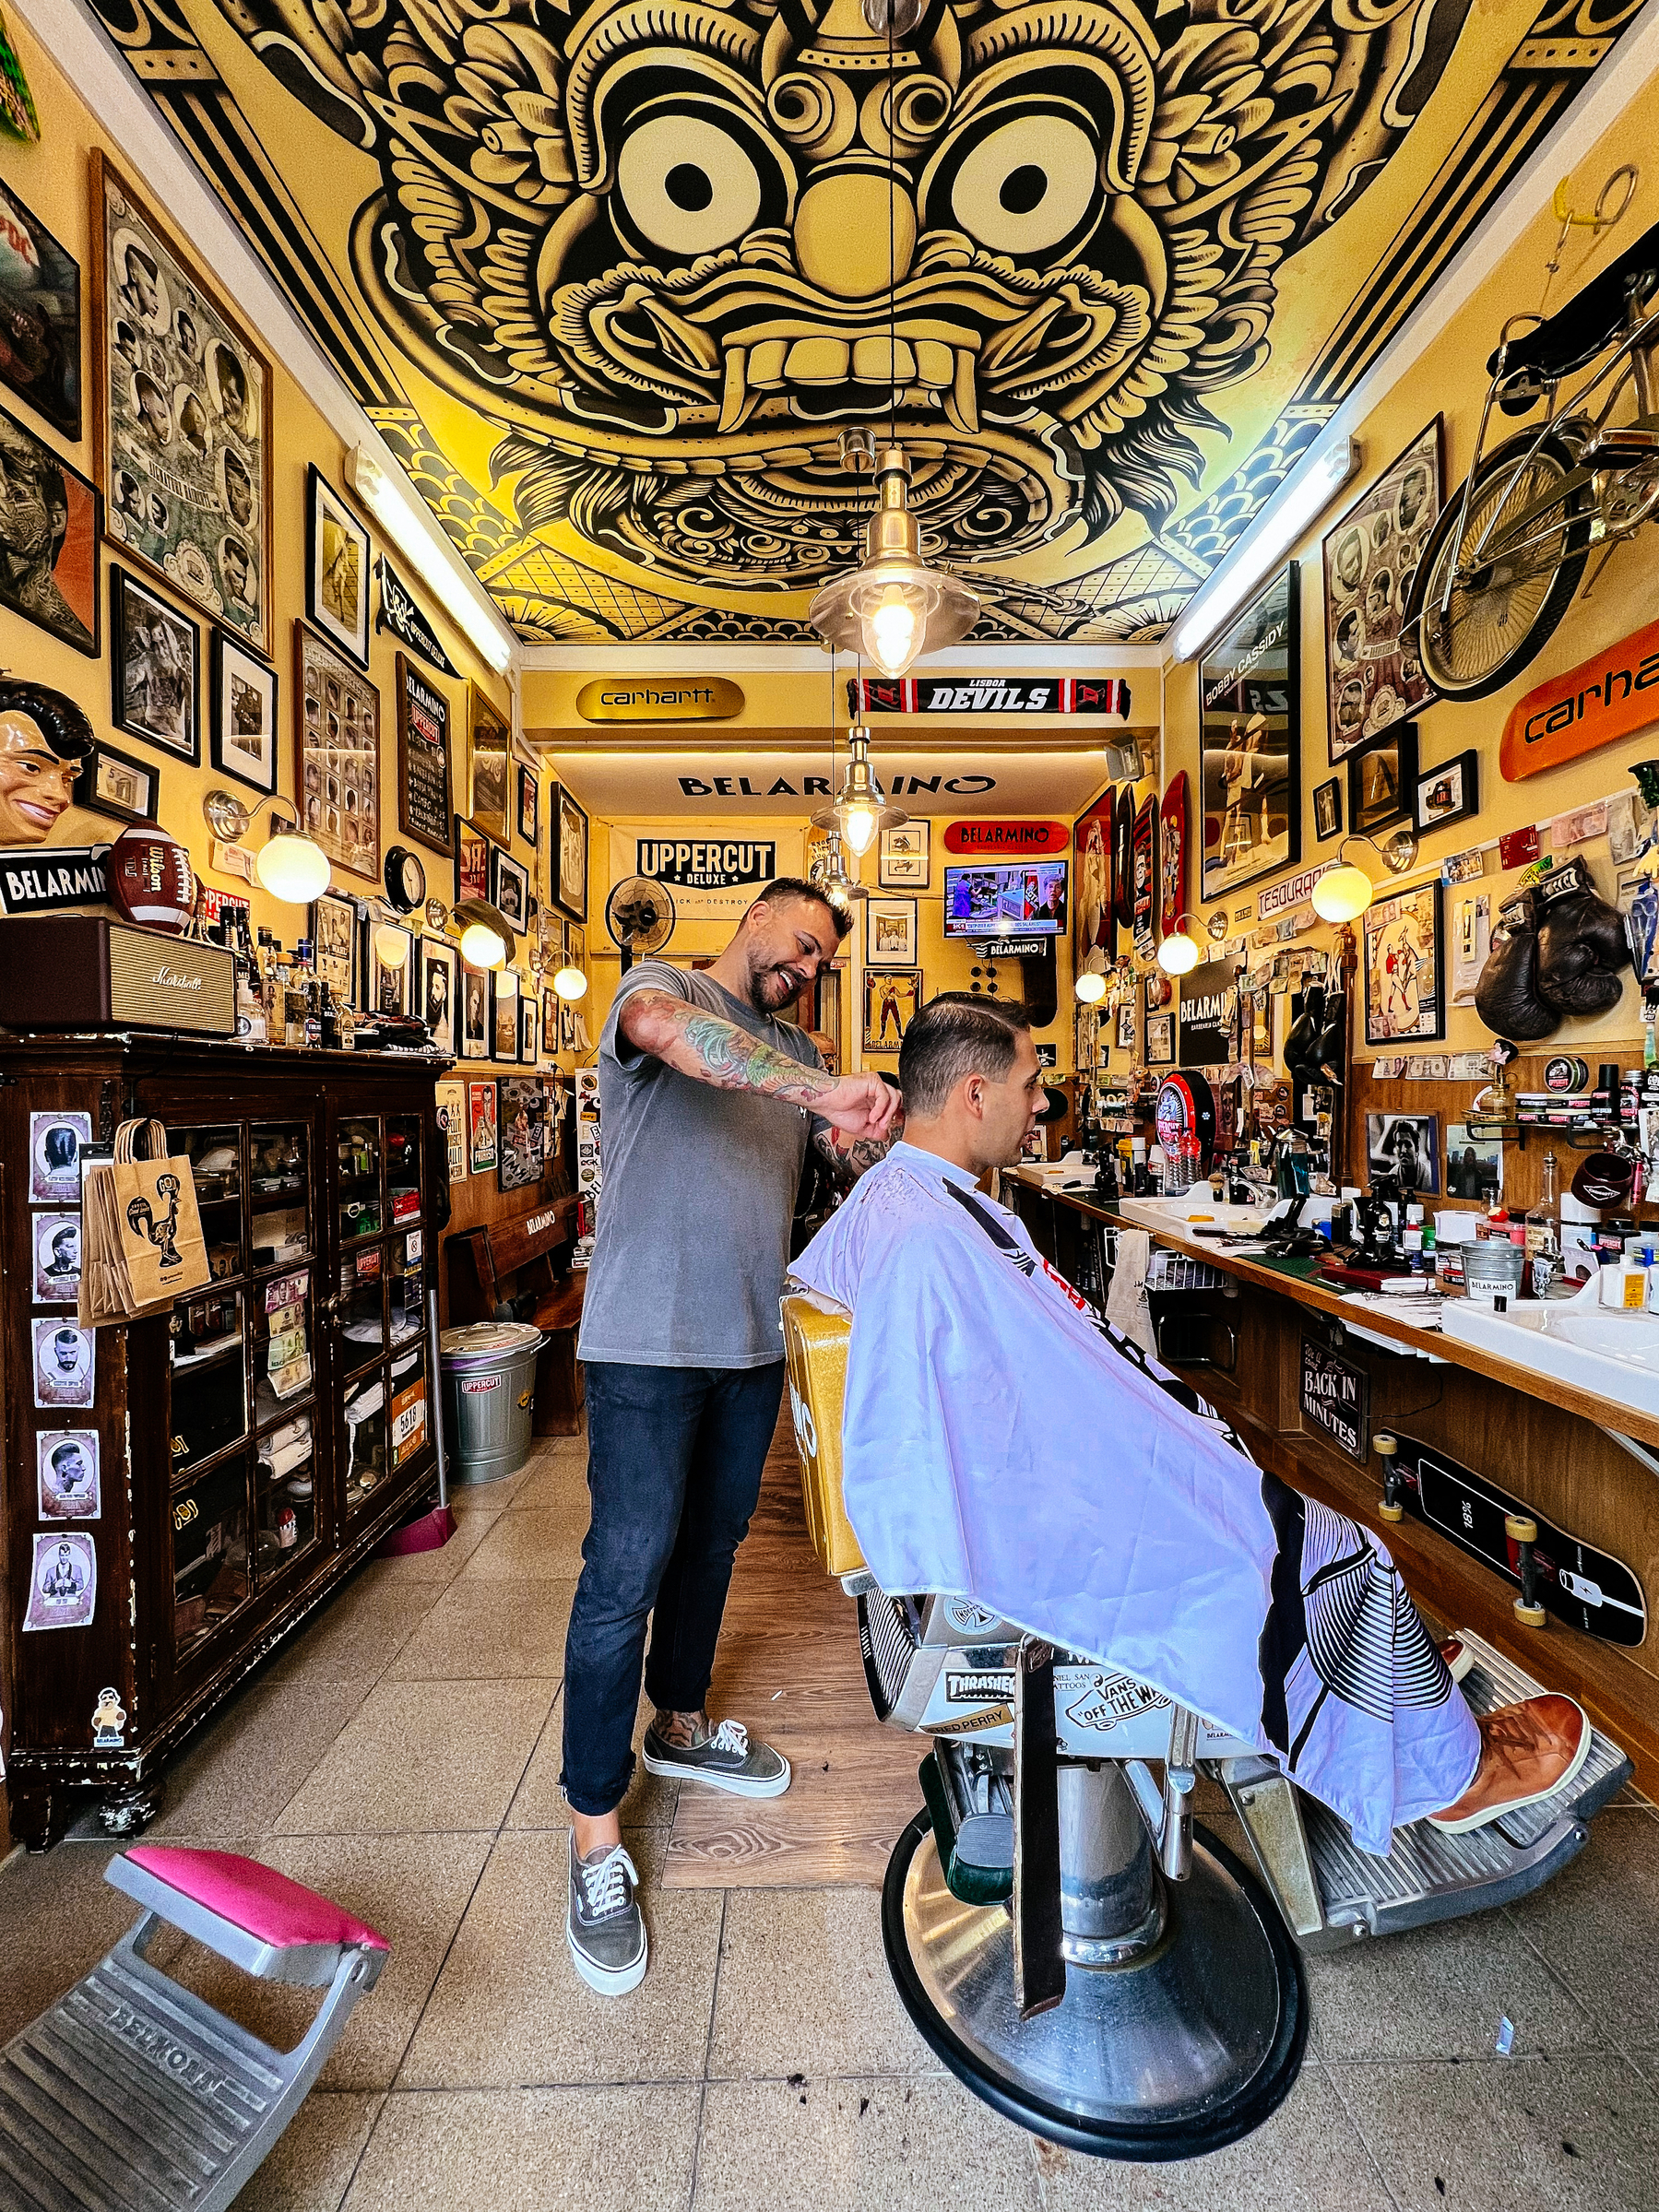 A barbershop with a Balinese design on the ceiling, a patron is getting a haircut